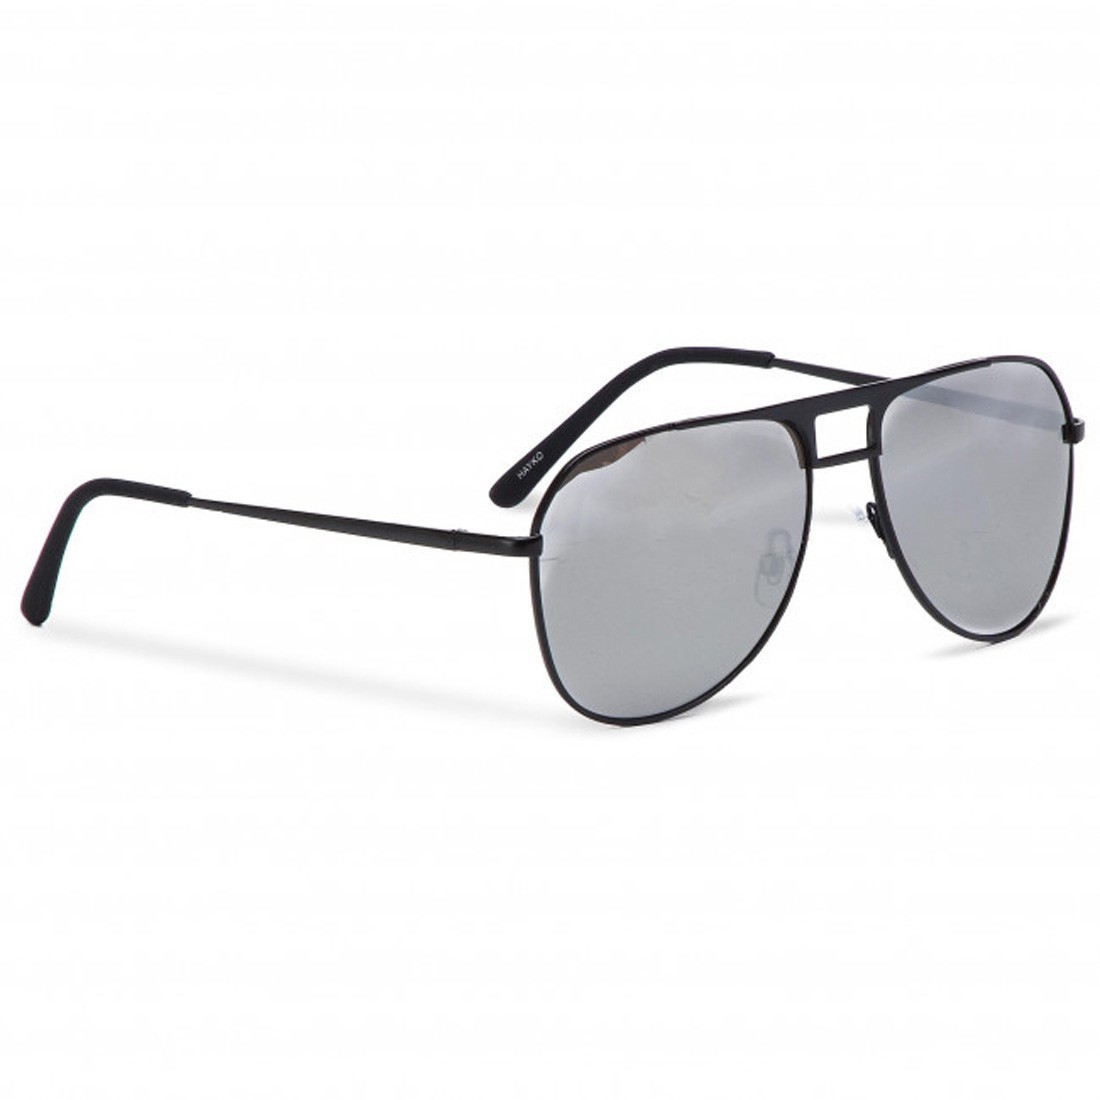 Buy VANS Men's Hayko Shades Sunglasses Matte Black / Silver Mirror - Vans,  delivered to your home | TheOutfit